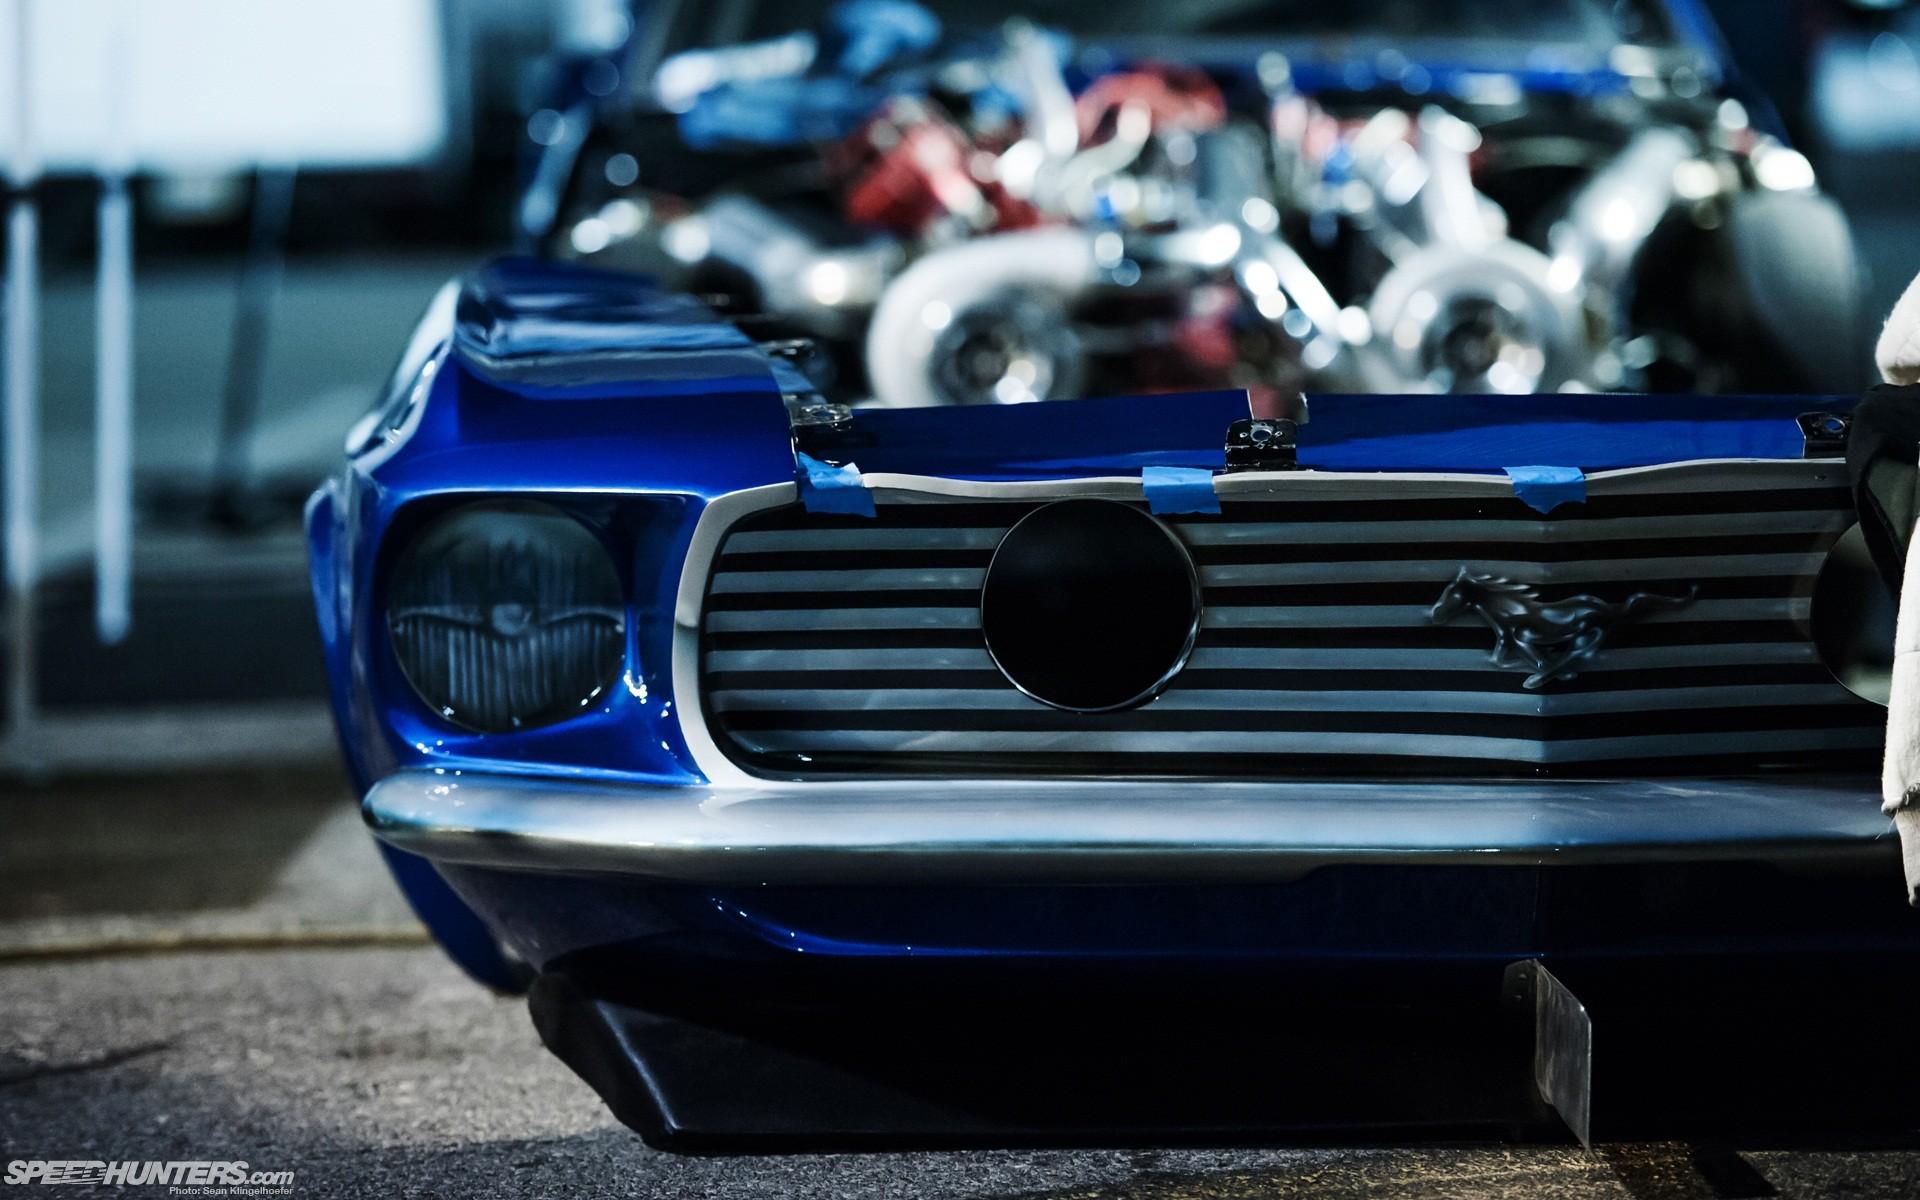 speddhunters, Ford, Mustang, Shelby, Vehicle, Cars, Hot, Rod